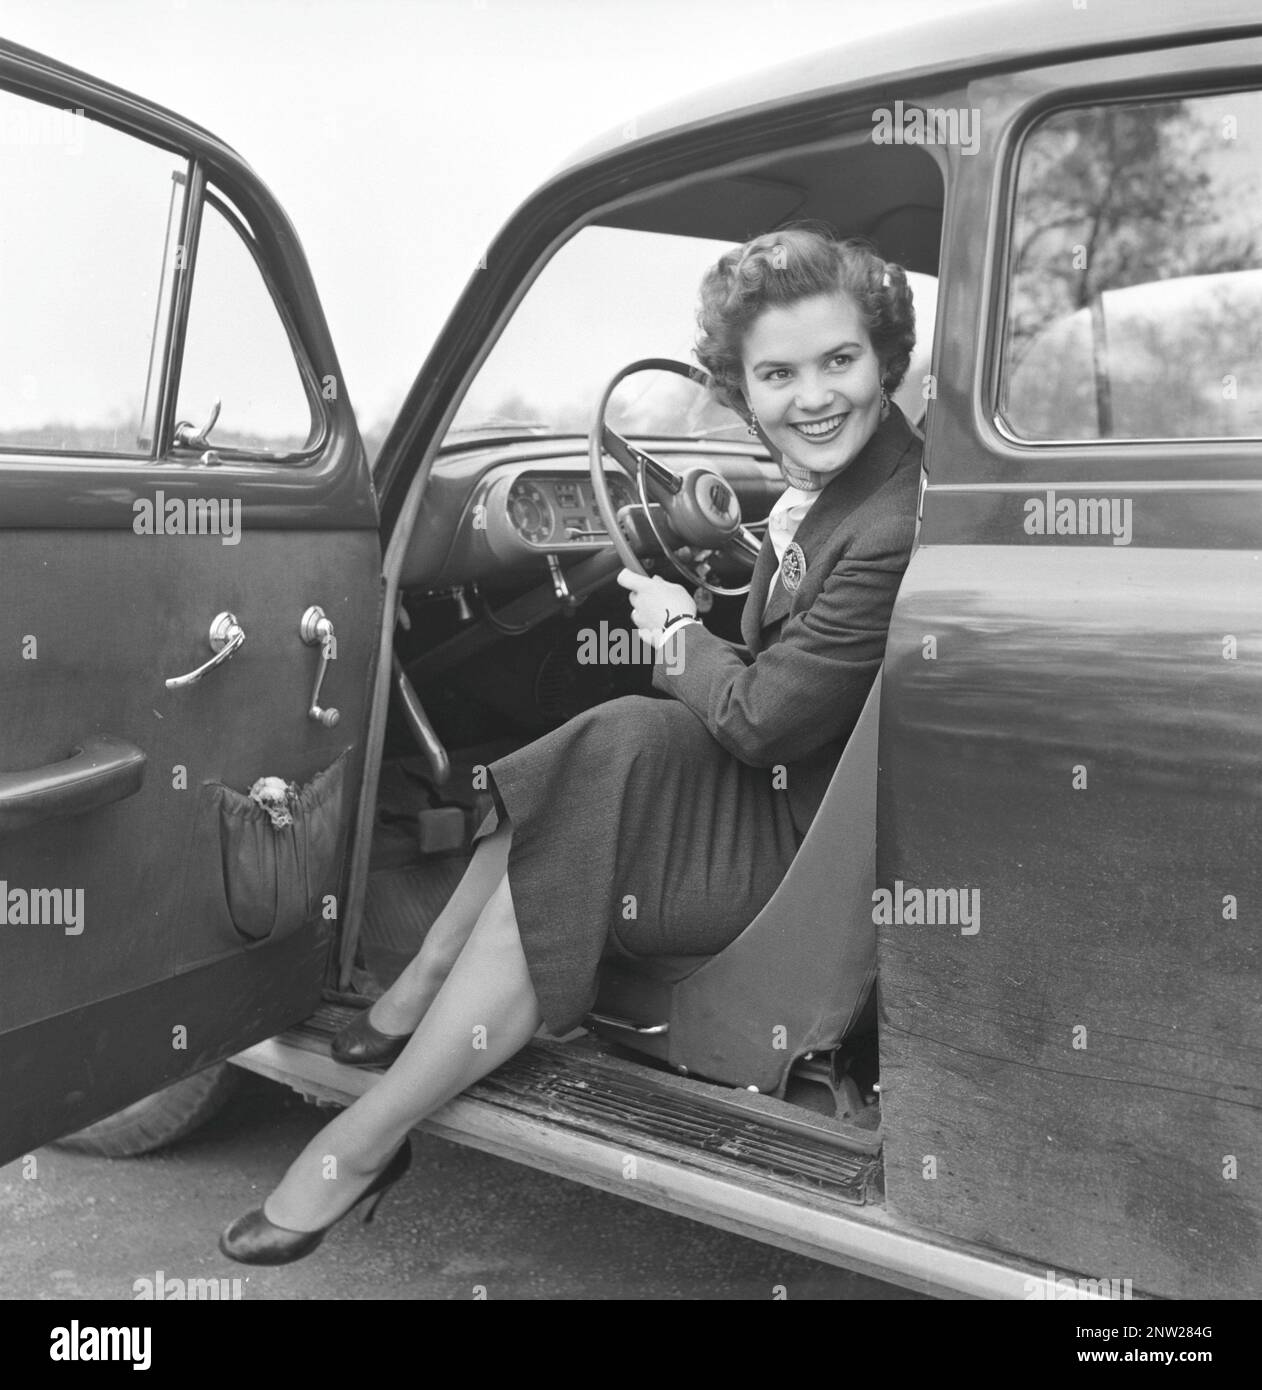 In the 1950s. A woman pictured in the driving seat of a car. Sweden april 1954 Stock Photo